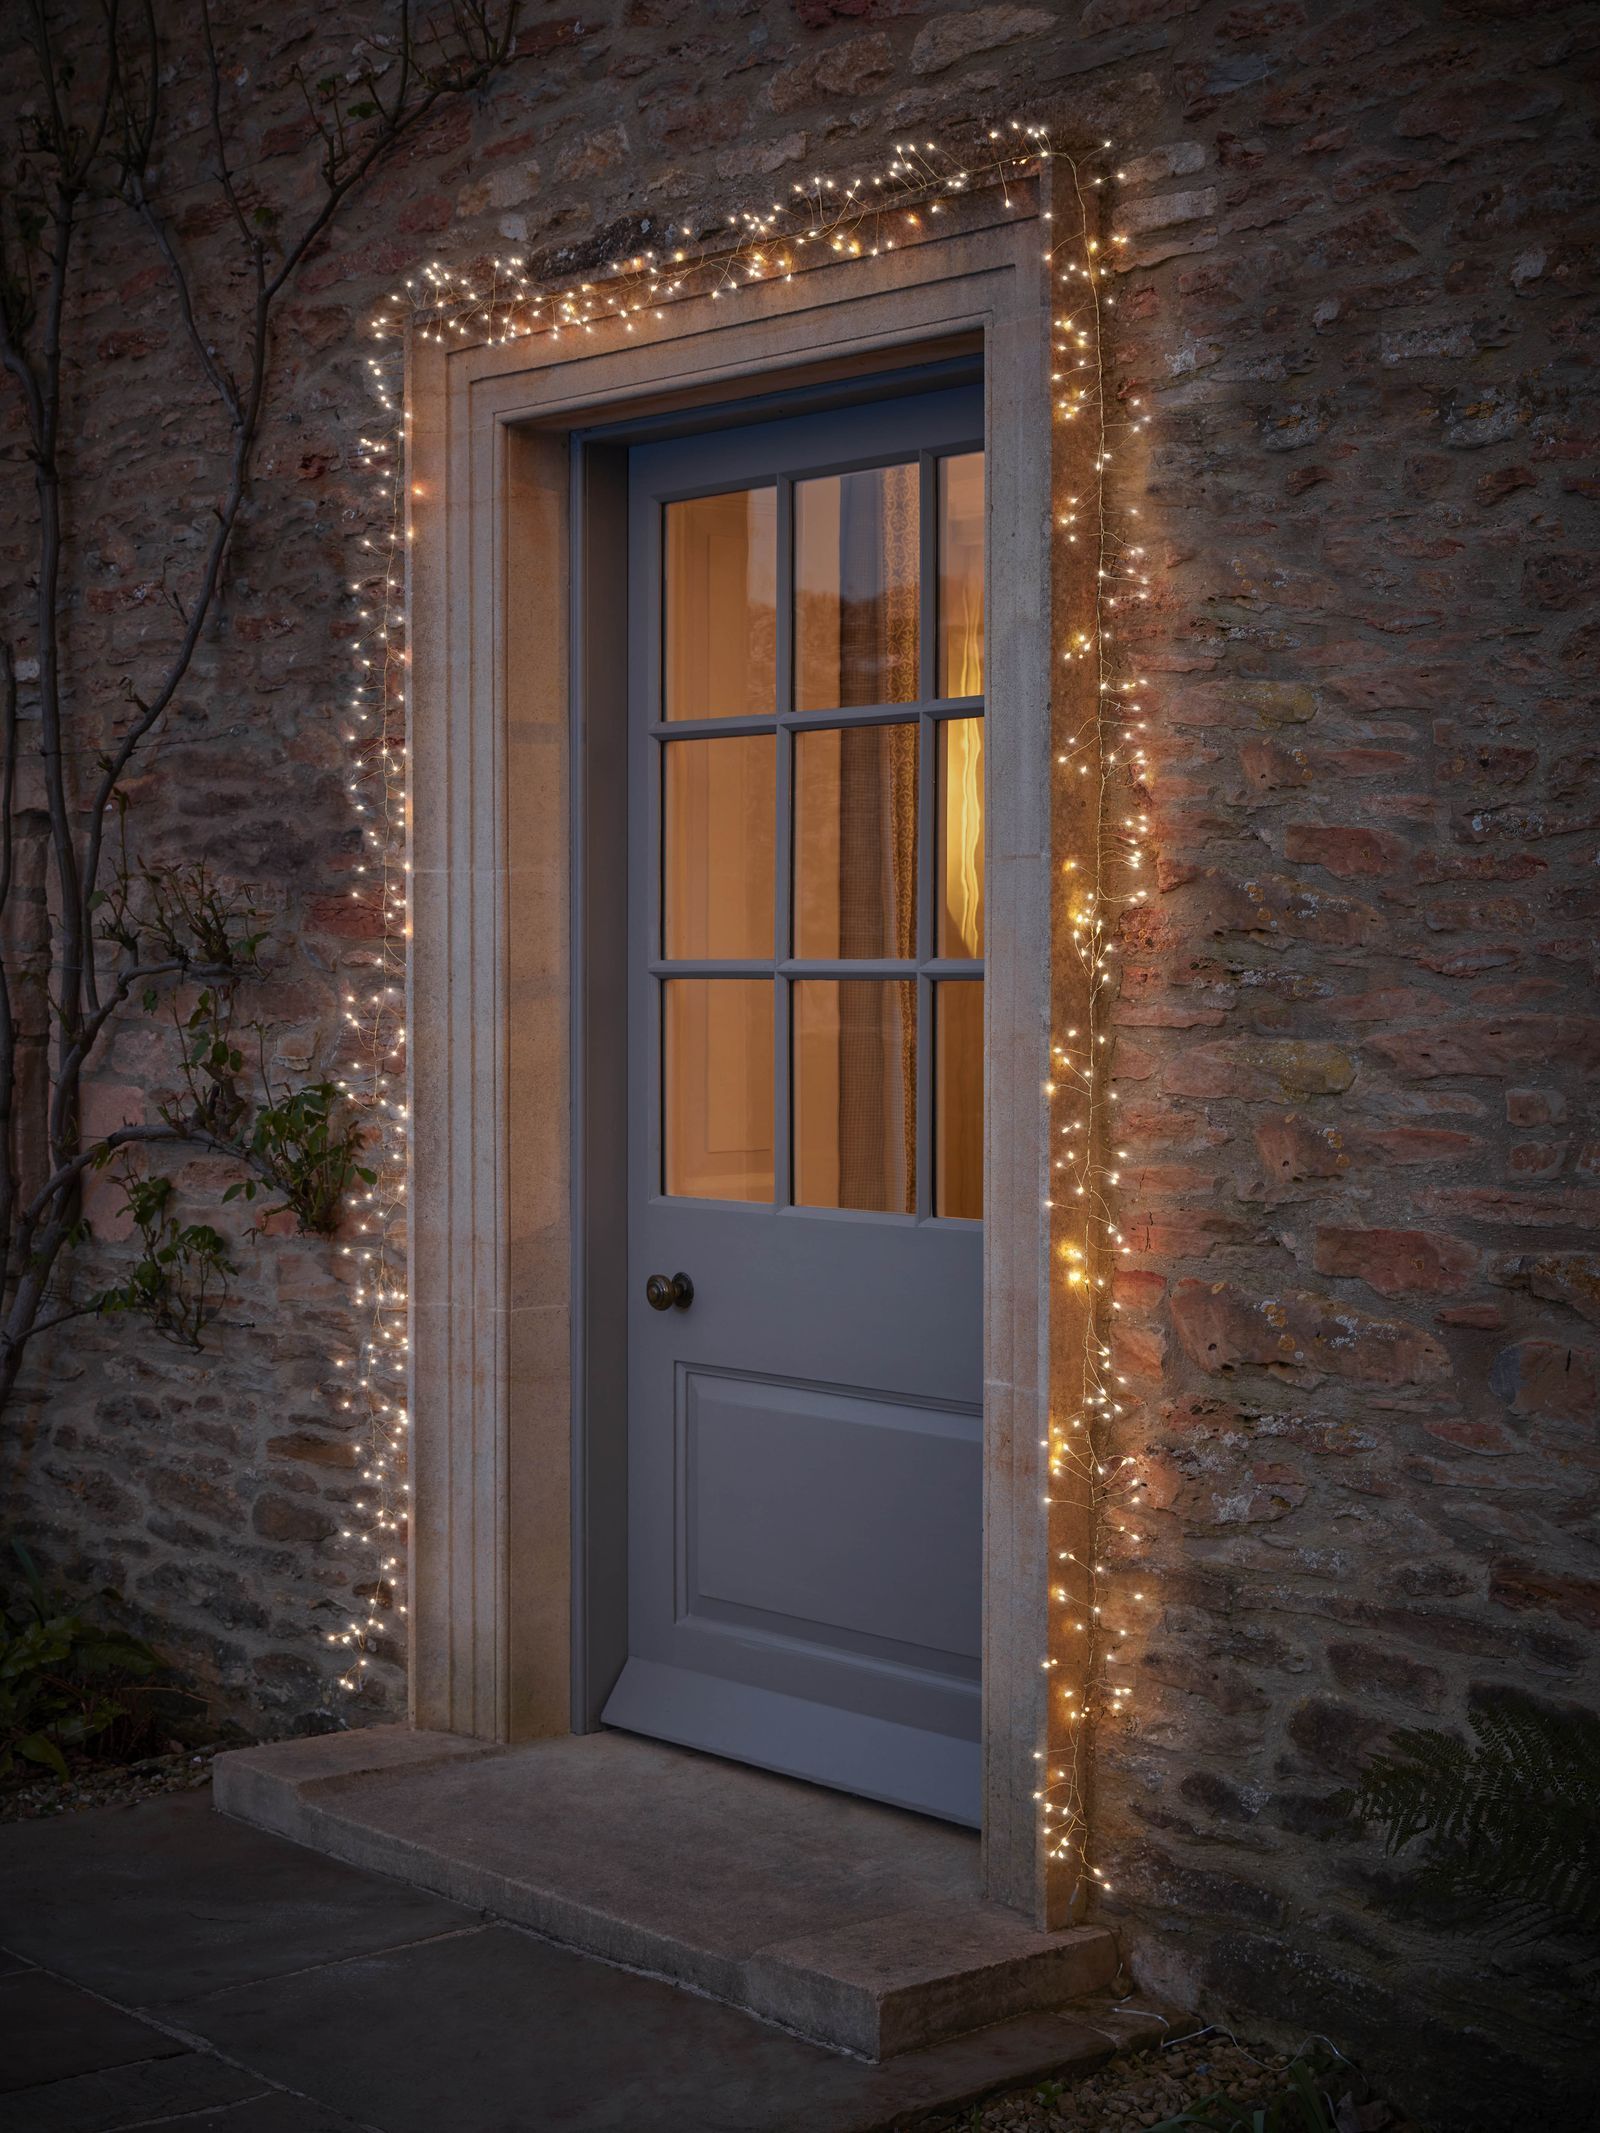 Outdoor Decoration For Christmas : The Best Ideas for Outdoor Christmas Decorations